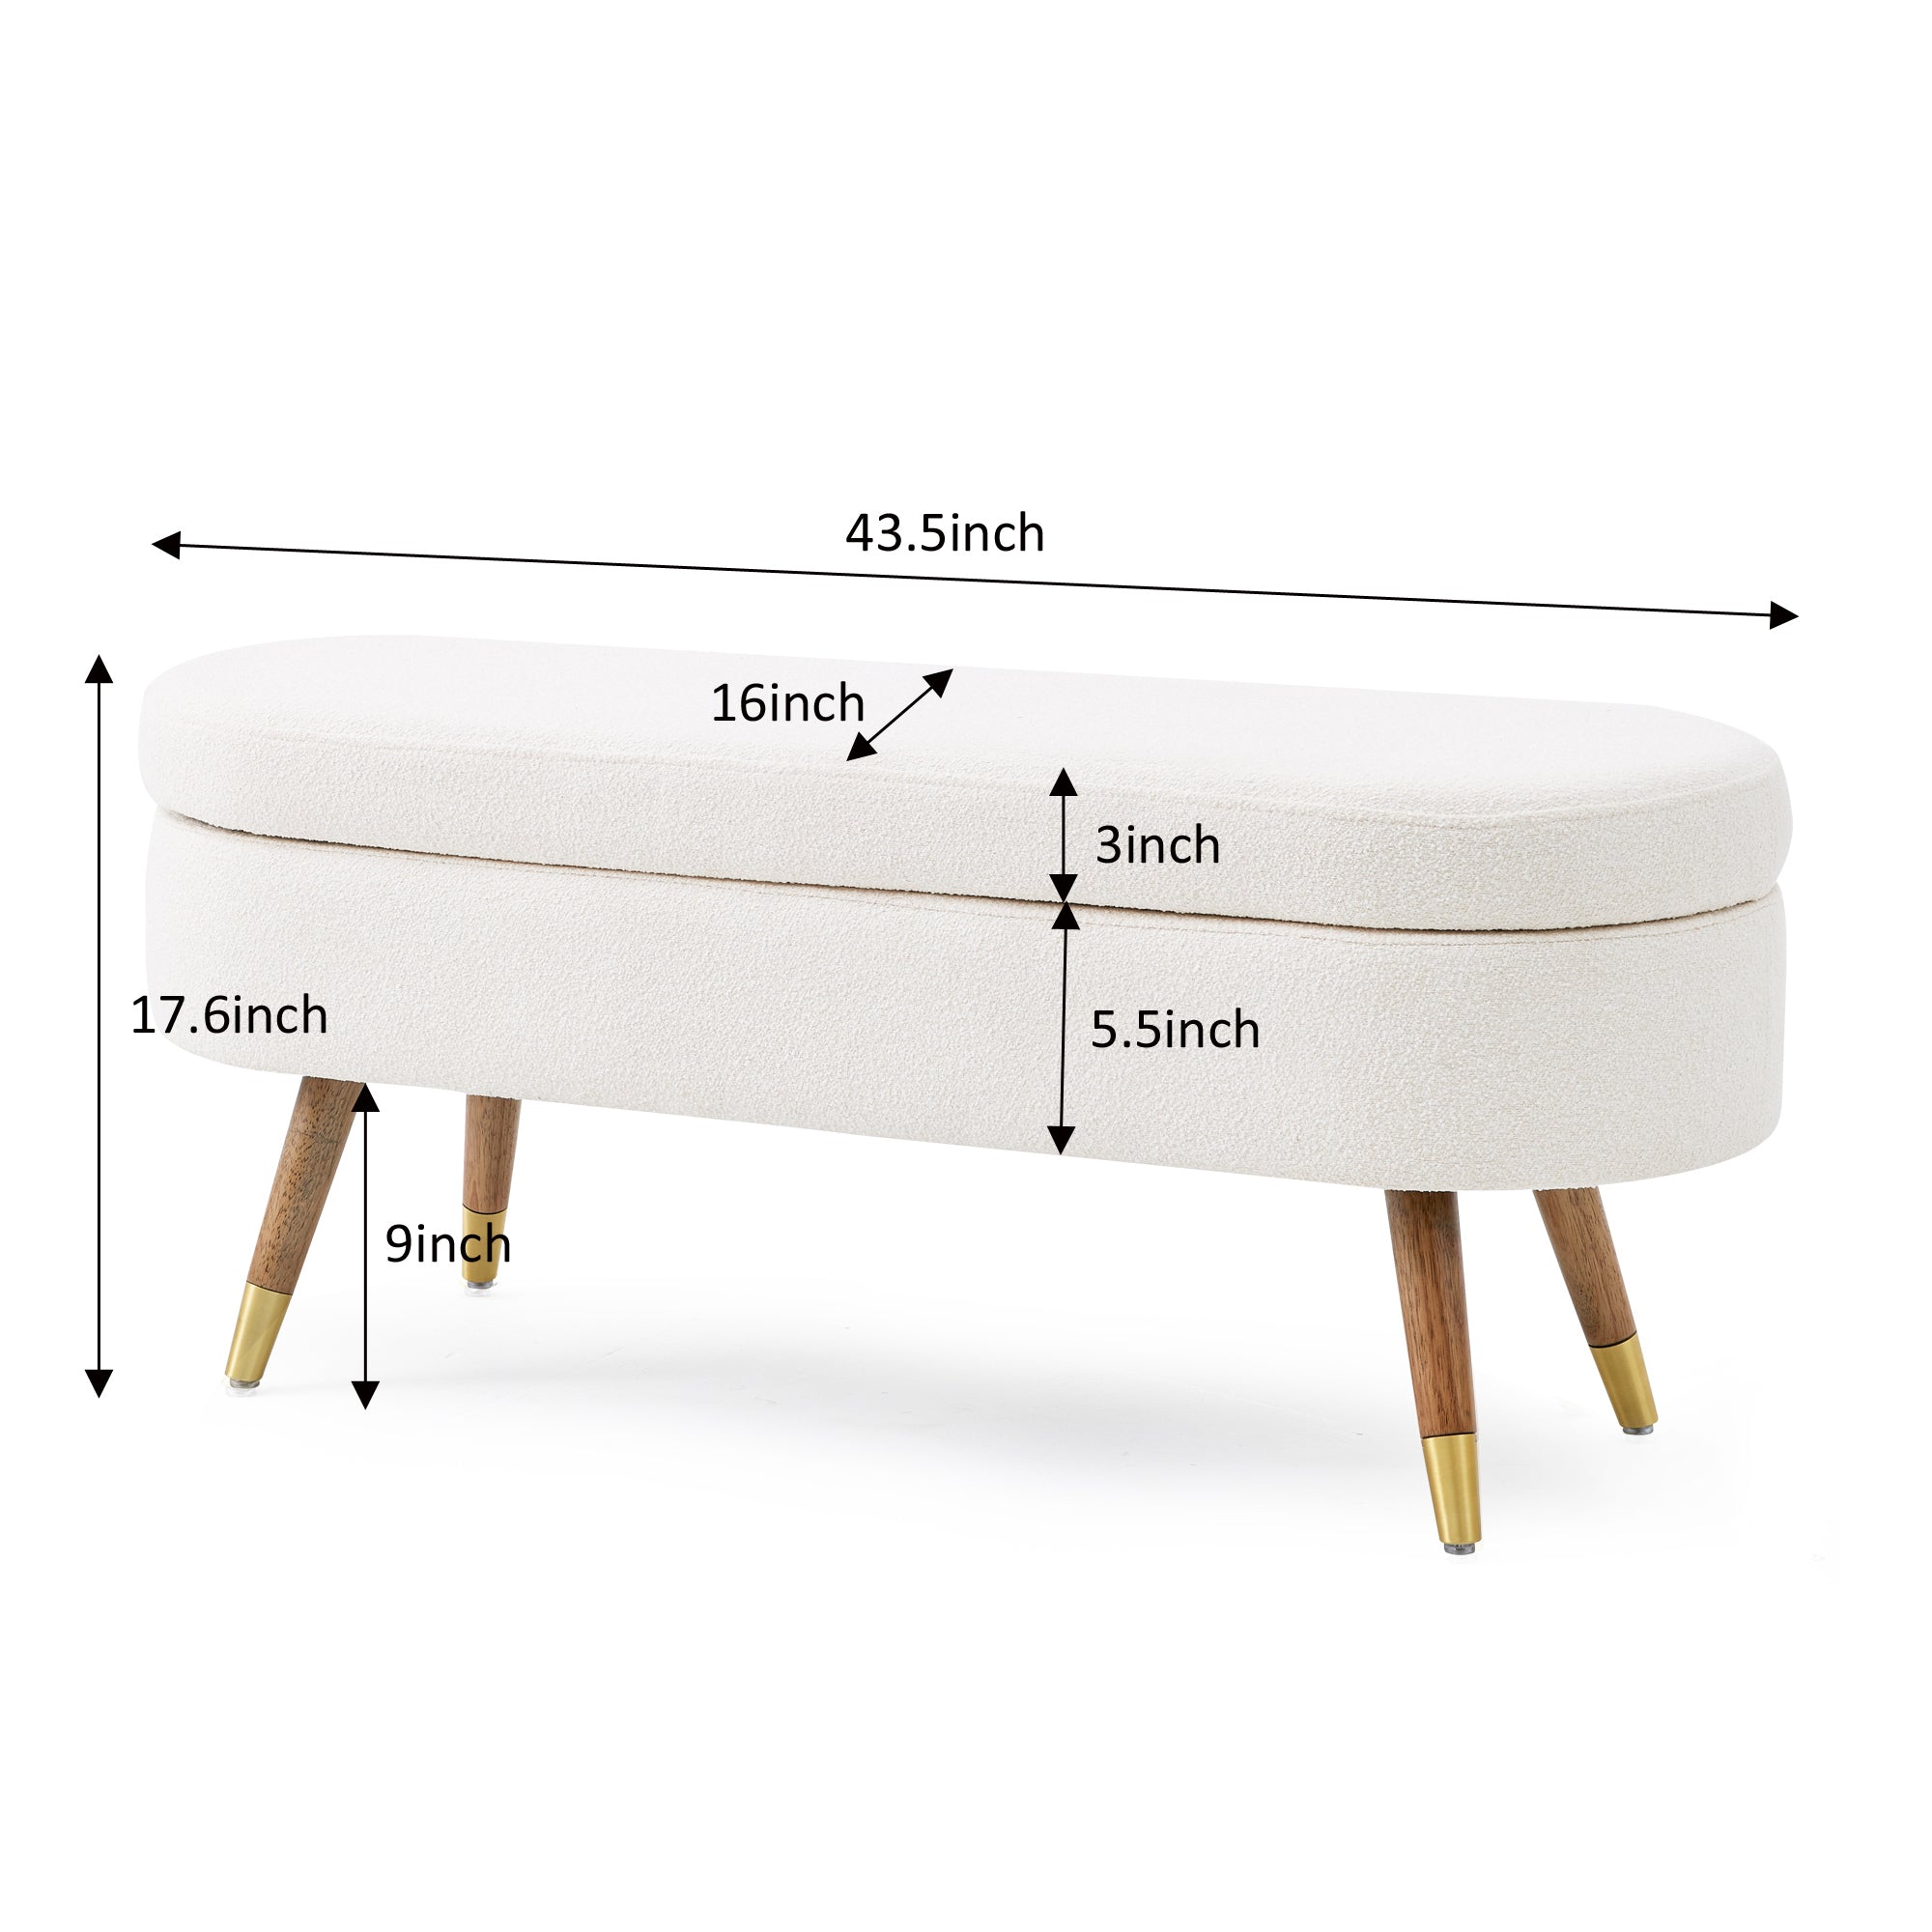 Storage bench Upholstered Boucle Ottoman with Golden Metal Legs End of Bed bench for Bedroom, Living Room, Entryway,Bed Side(Ivory)